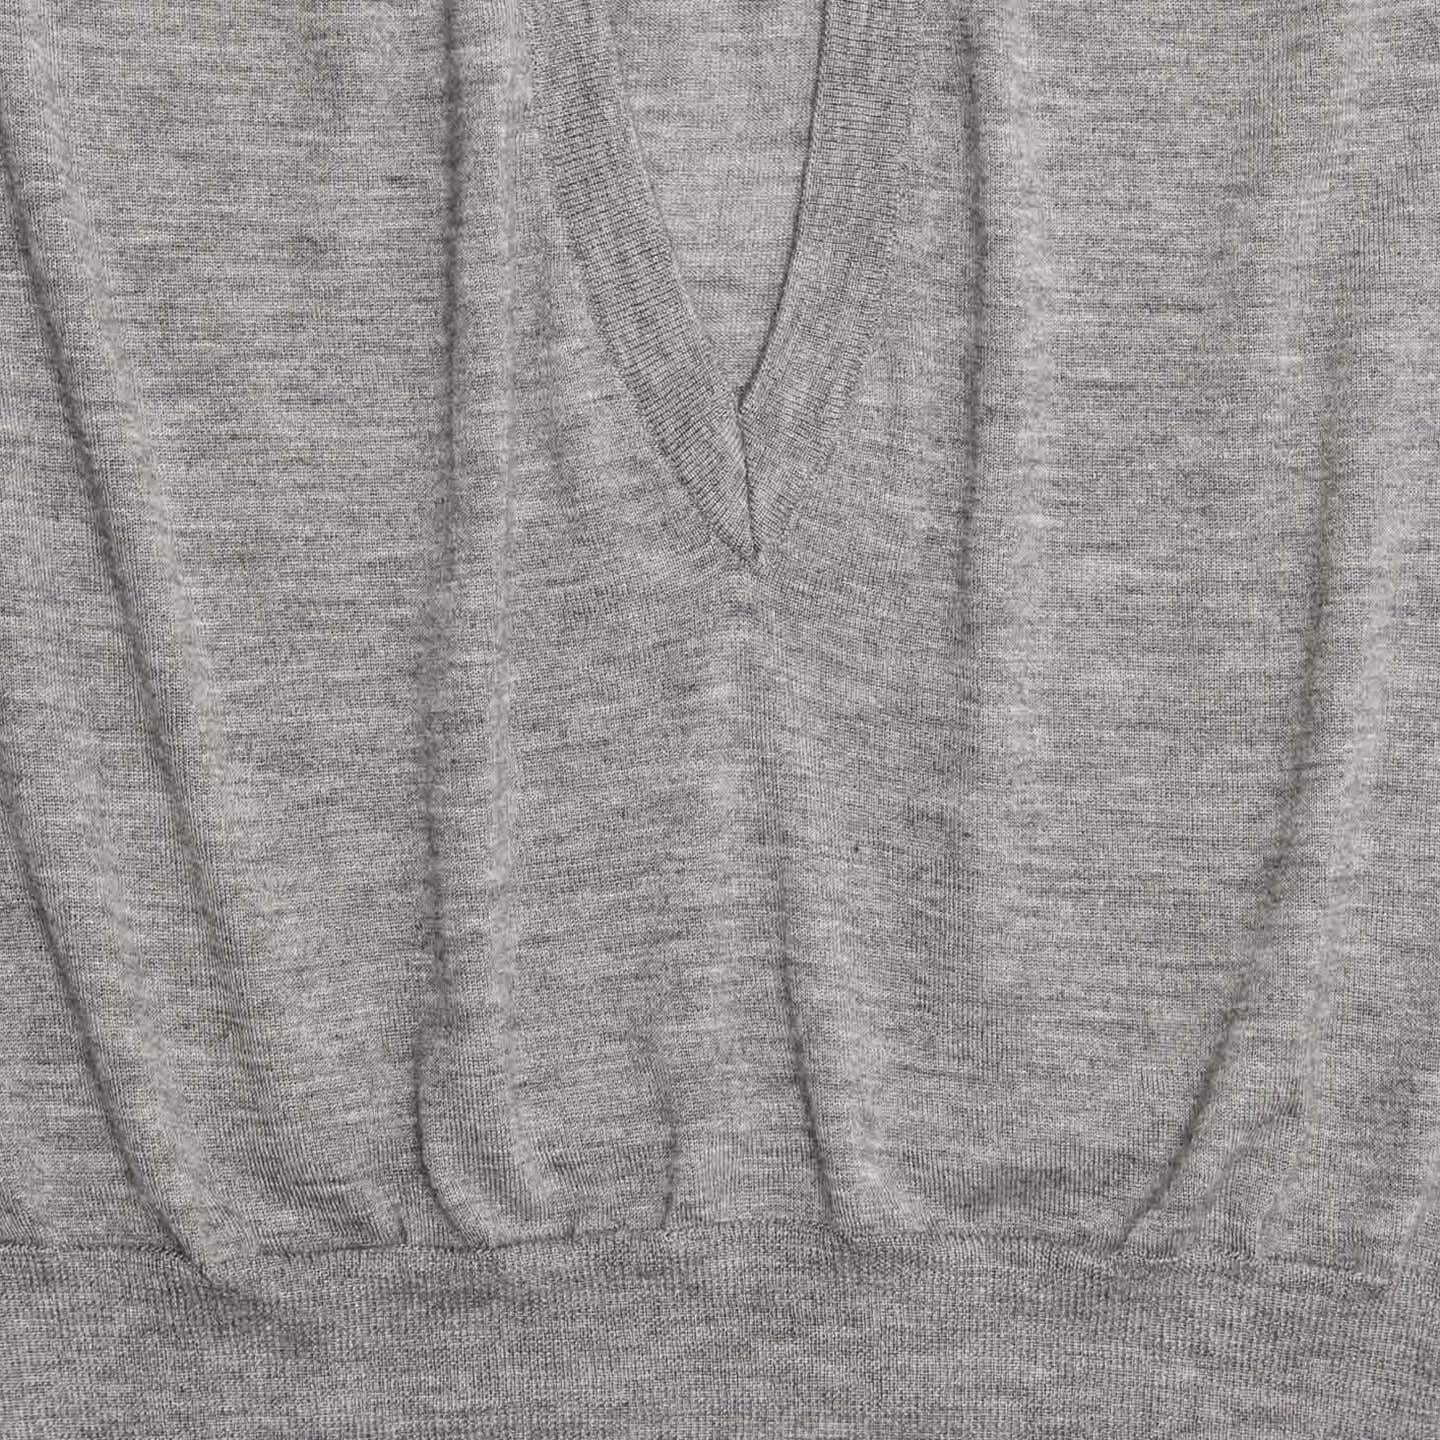 Celine Grey Cashmere Deep V-Neck Vest In Excellent Condition For Sale In Brooklyn, NY